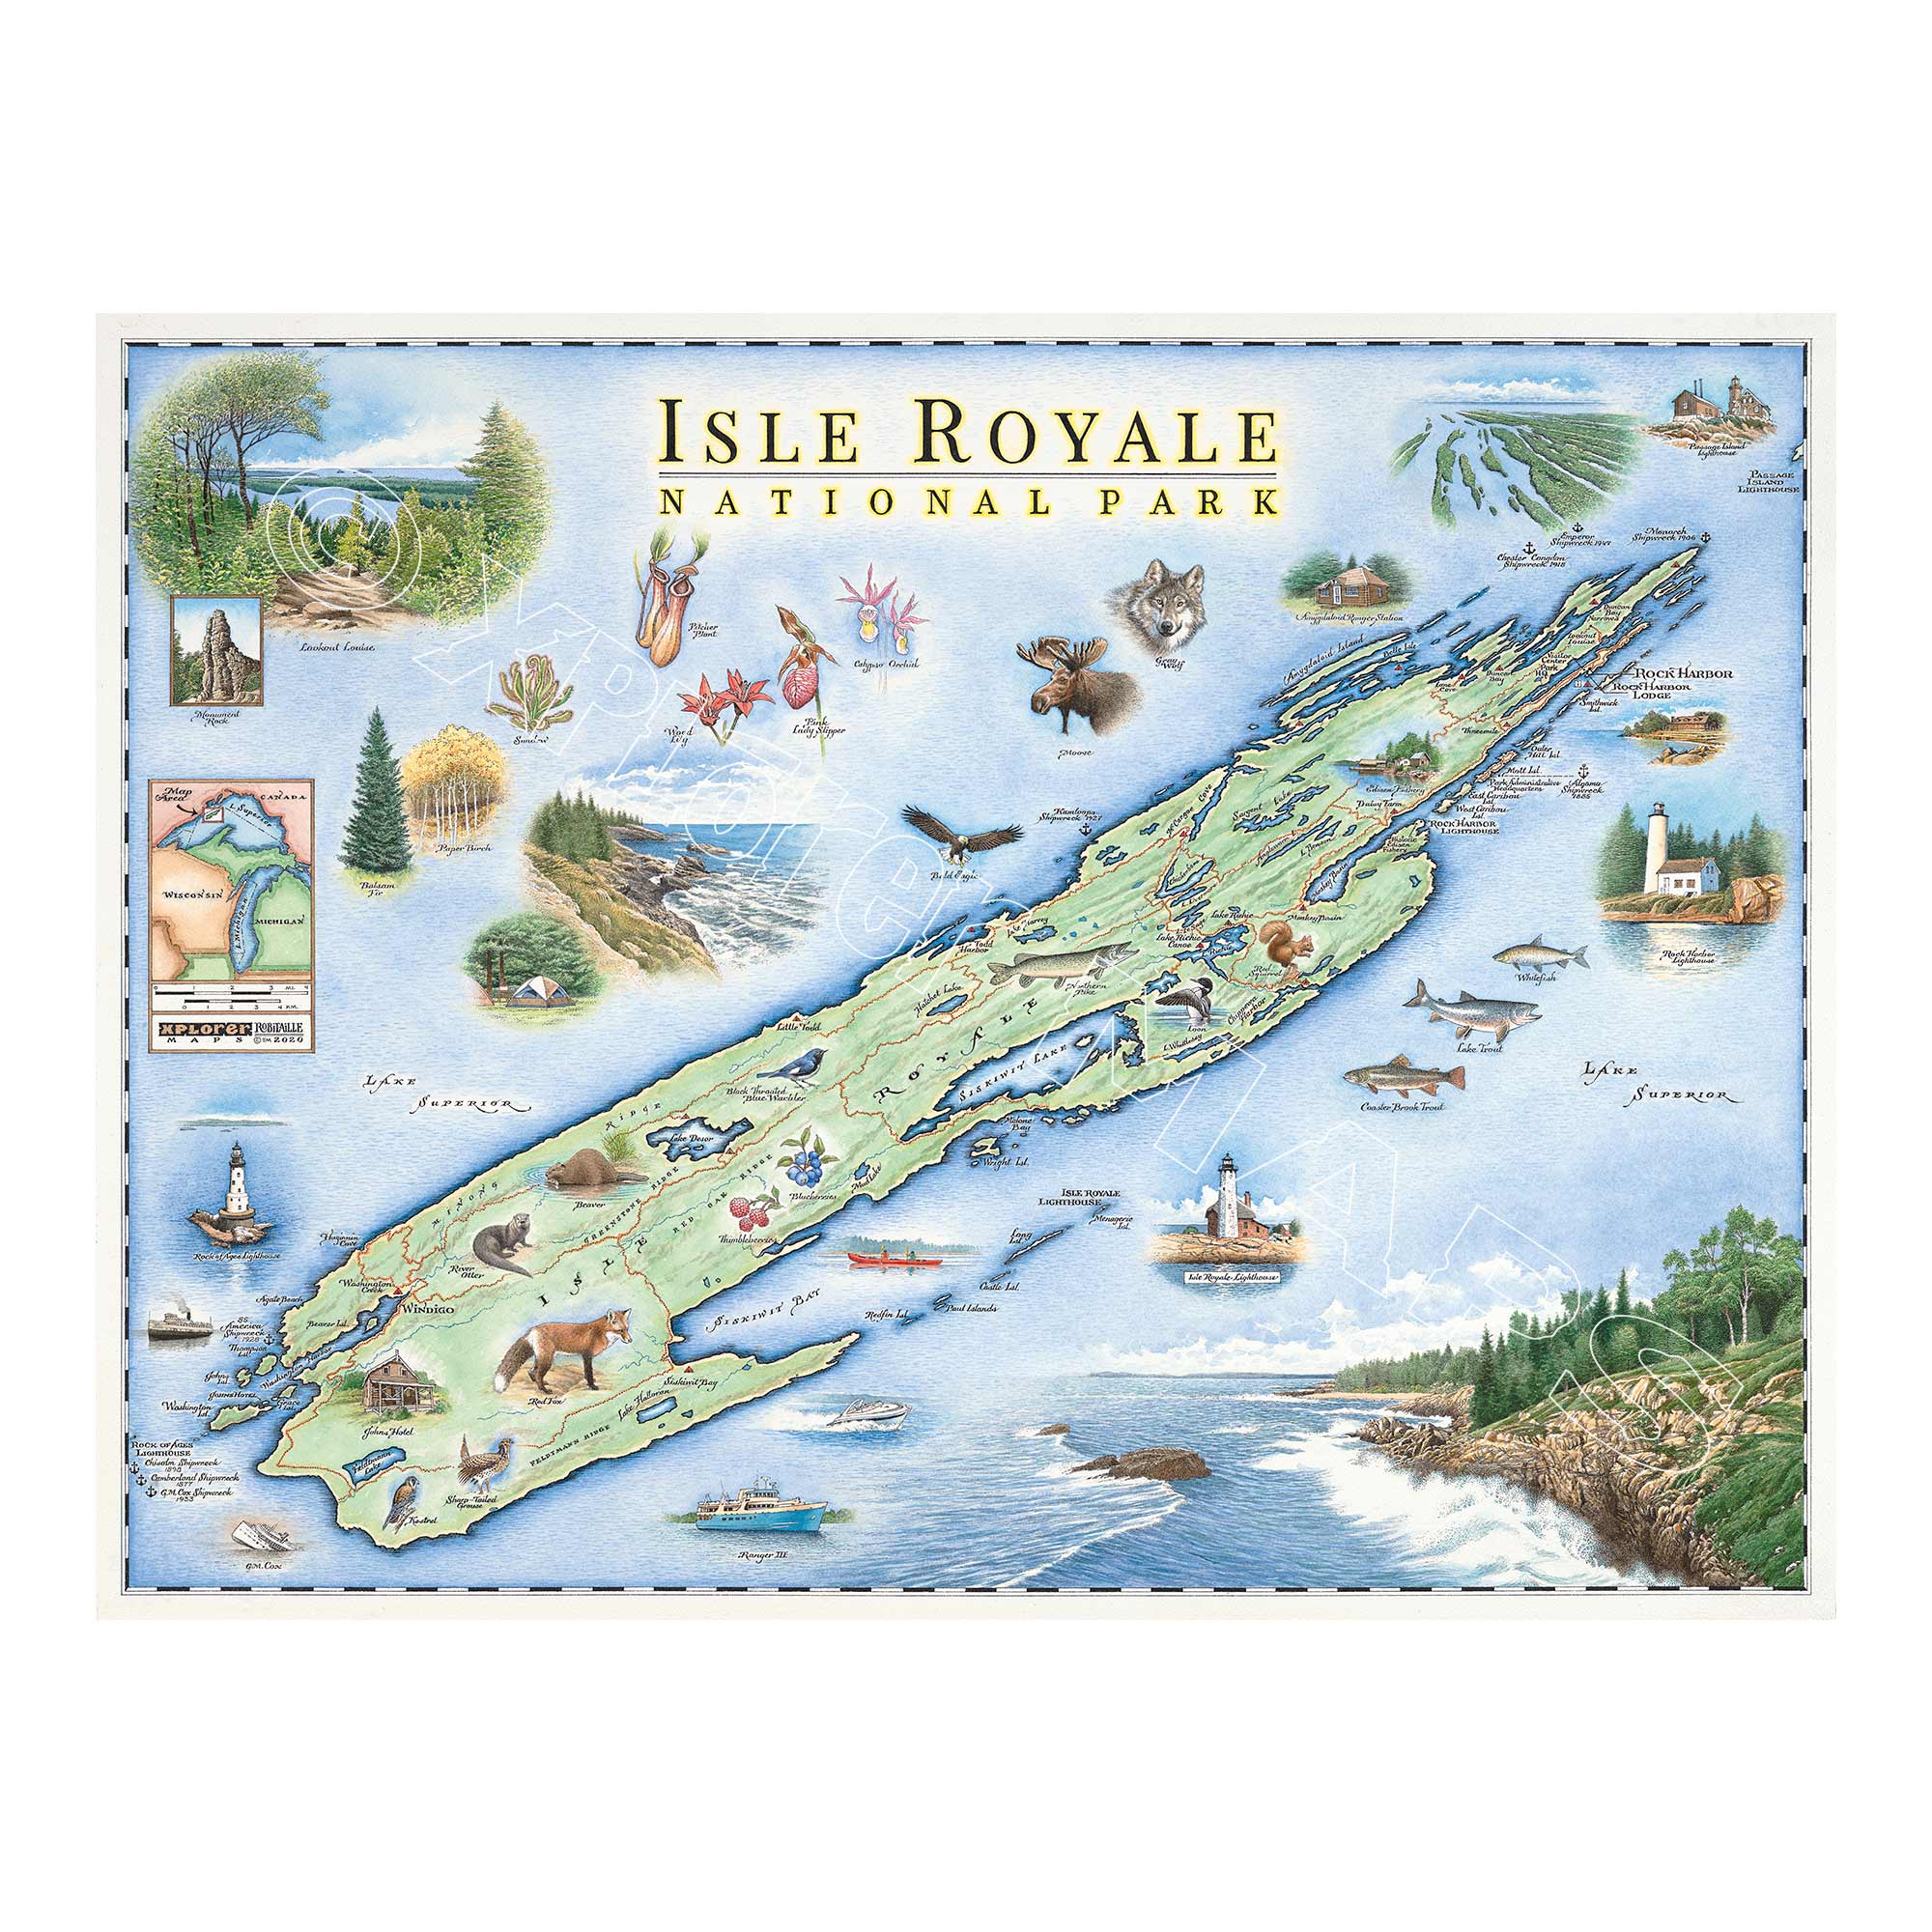 Isle Royale National Park hand-drawn map in earth tones blue and green. Isle Royale is an island in Lake Superior off the coasts of Minnesota and Michigan. The map features flora and fauna such wolf, moose, Pink Lady Slippers, and Thimbleberries. Other illustrations include Lookout Louise, Rock of Ages Lighthouse, and the Rocky Harbor Lodge. Measures 24x18.